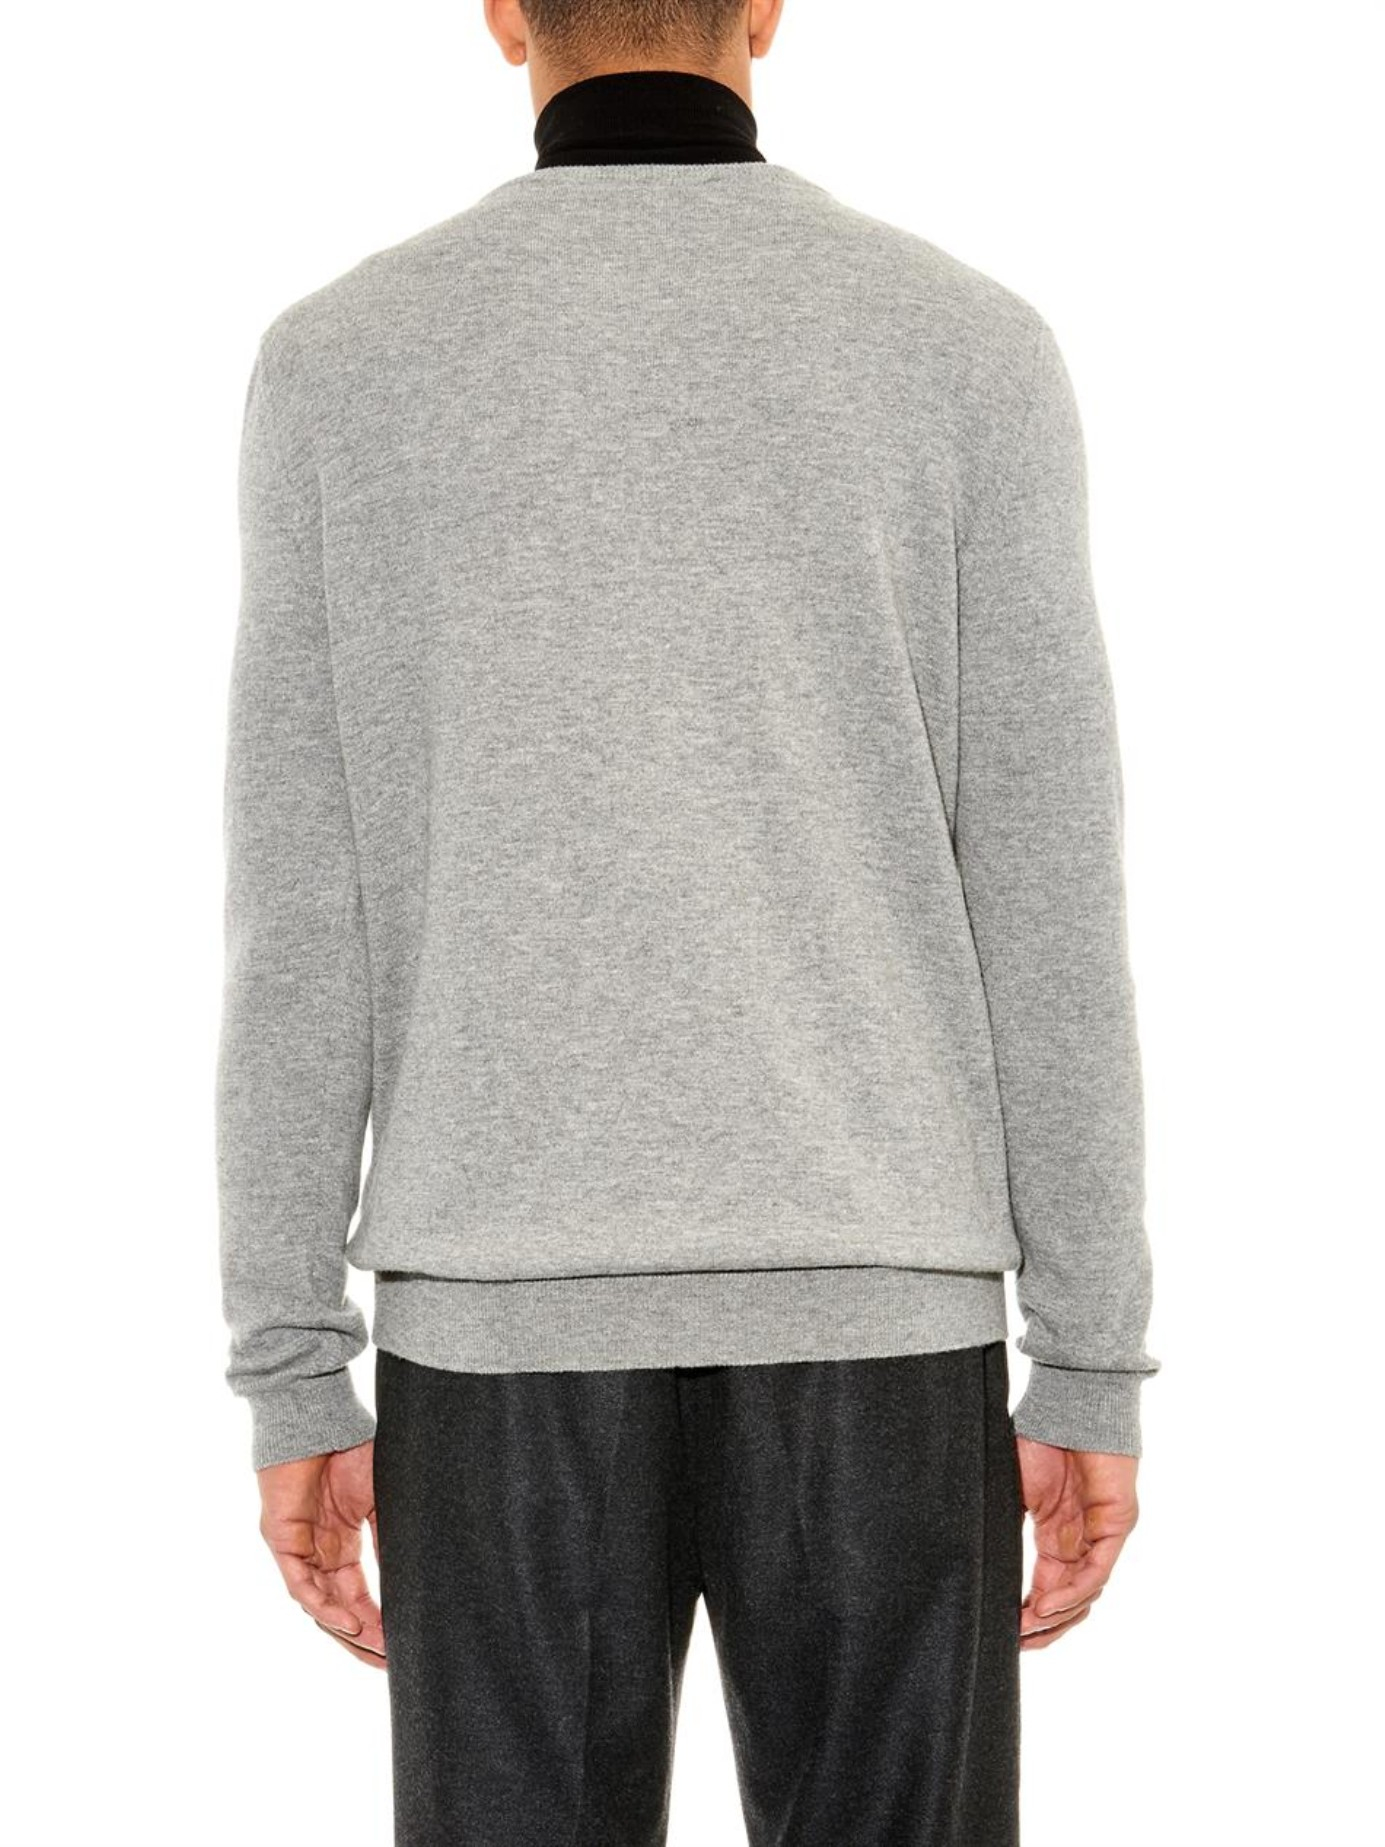 Lyst - Balenciaga V-Neck Wool Sweater in Gray for Men